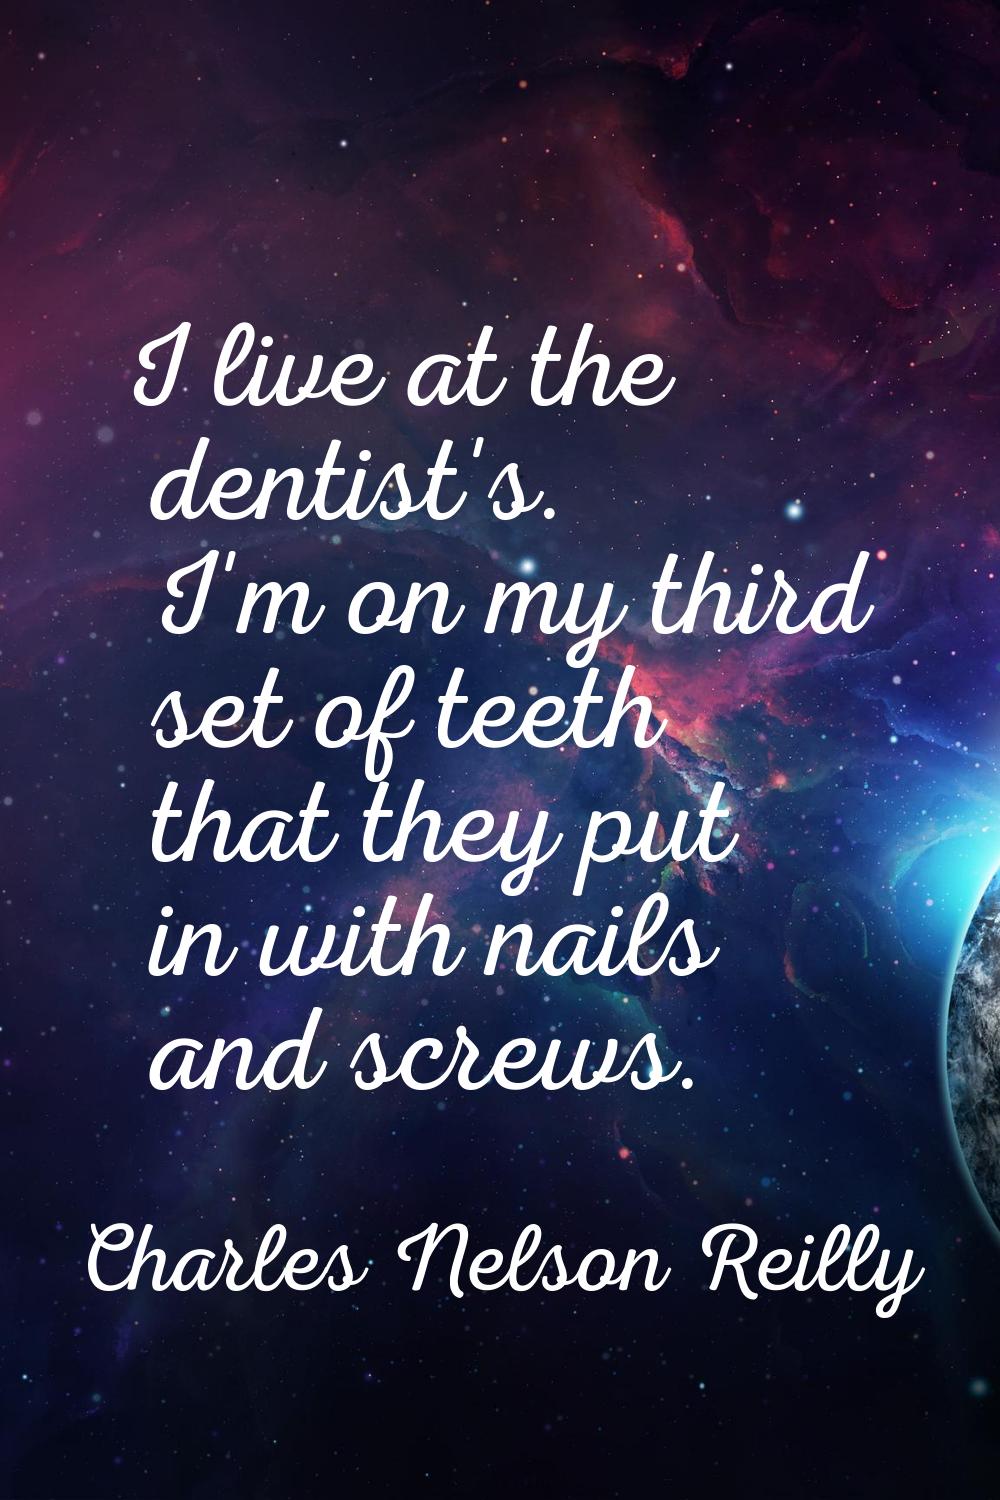 I live at the dentist's. I'm on my third set of teeth that they put in with nails and screws.